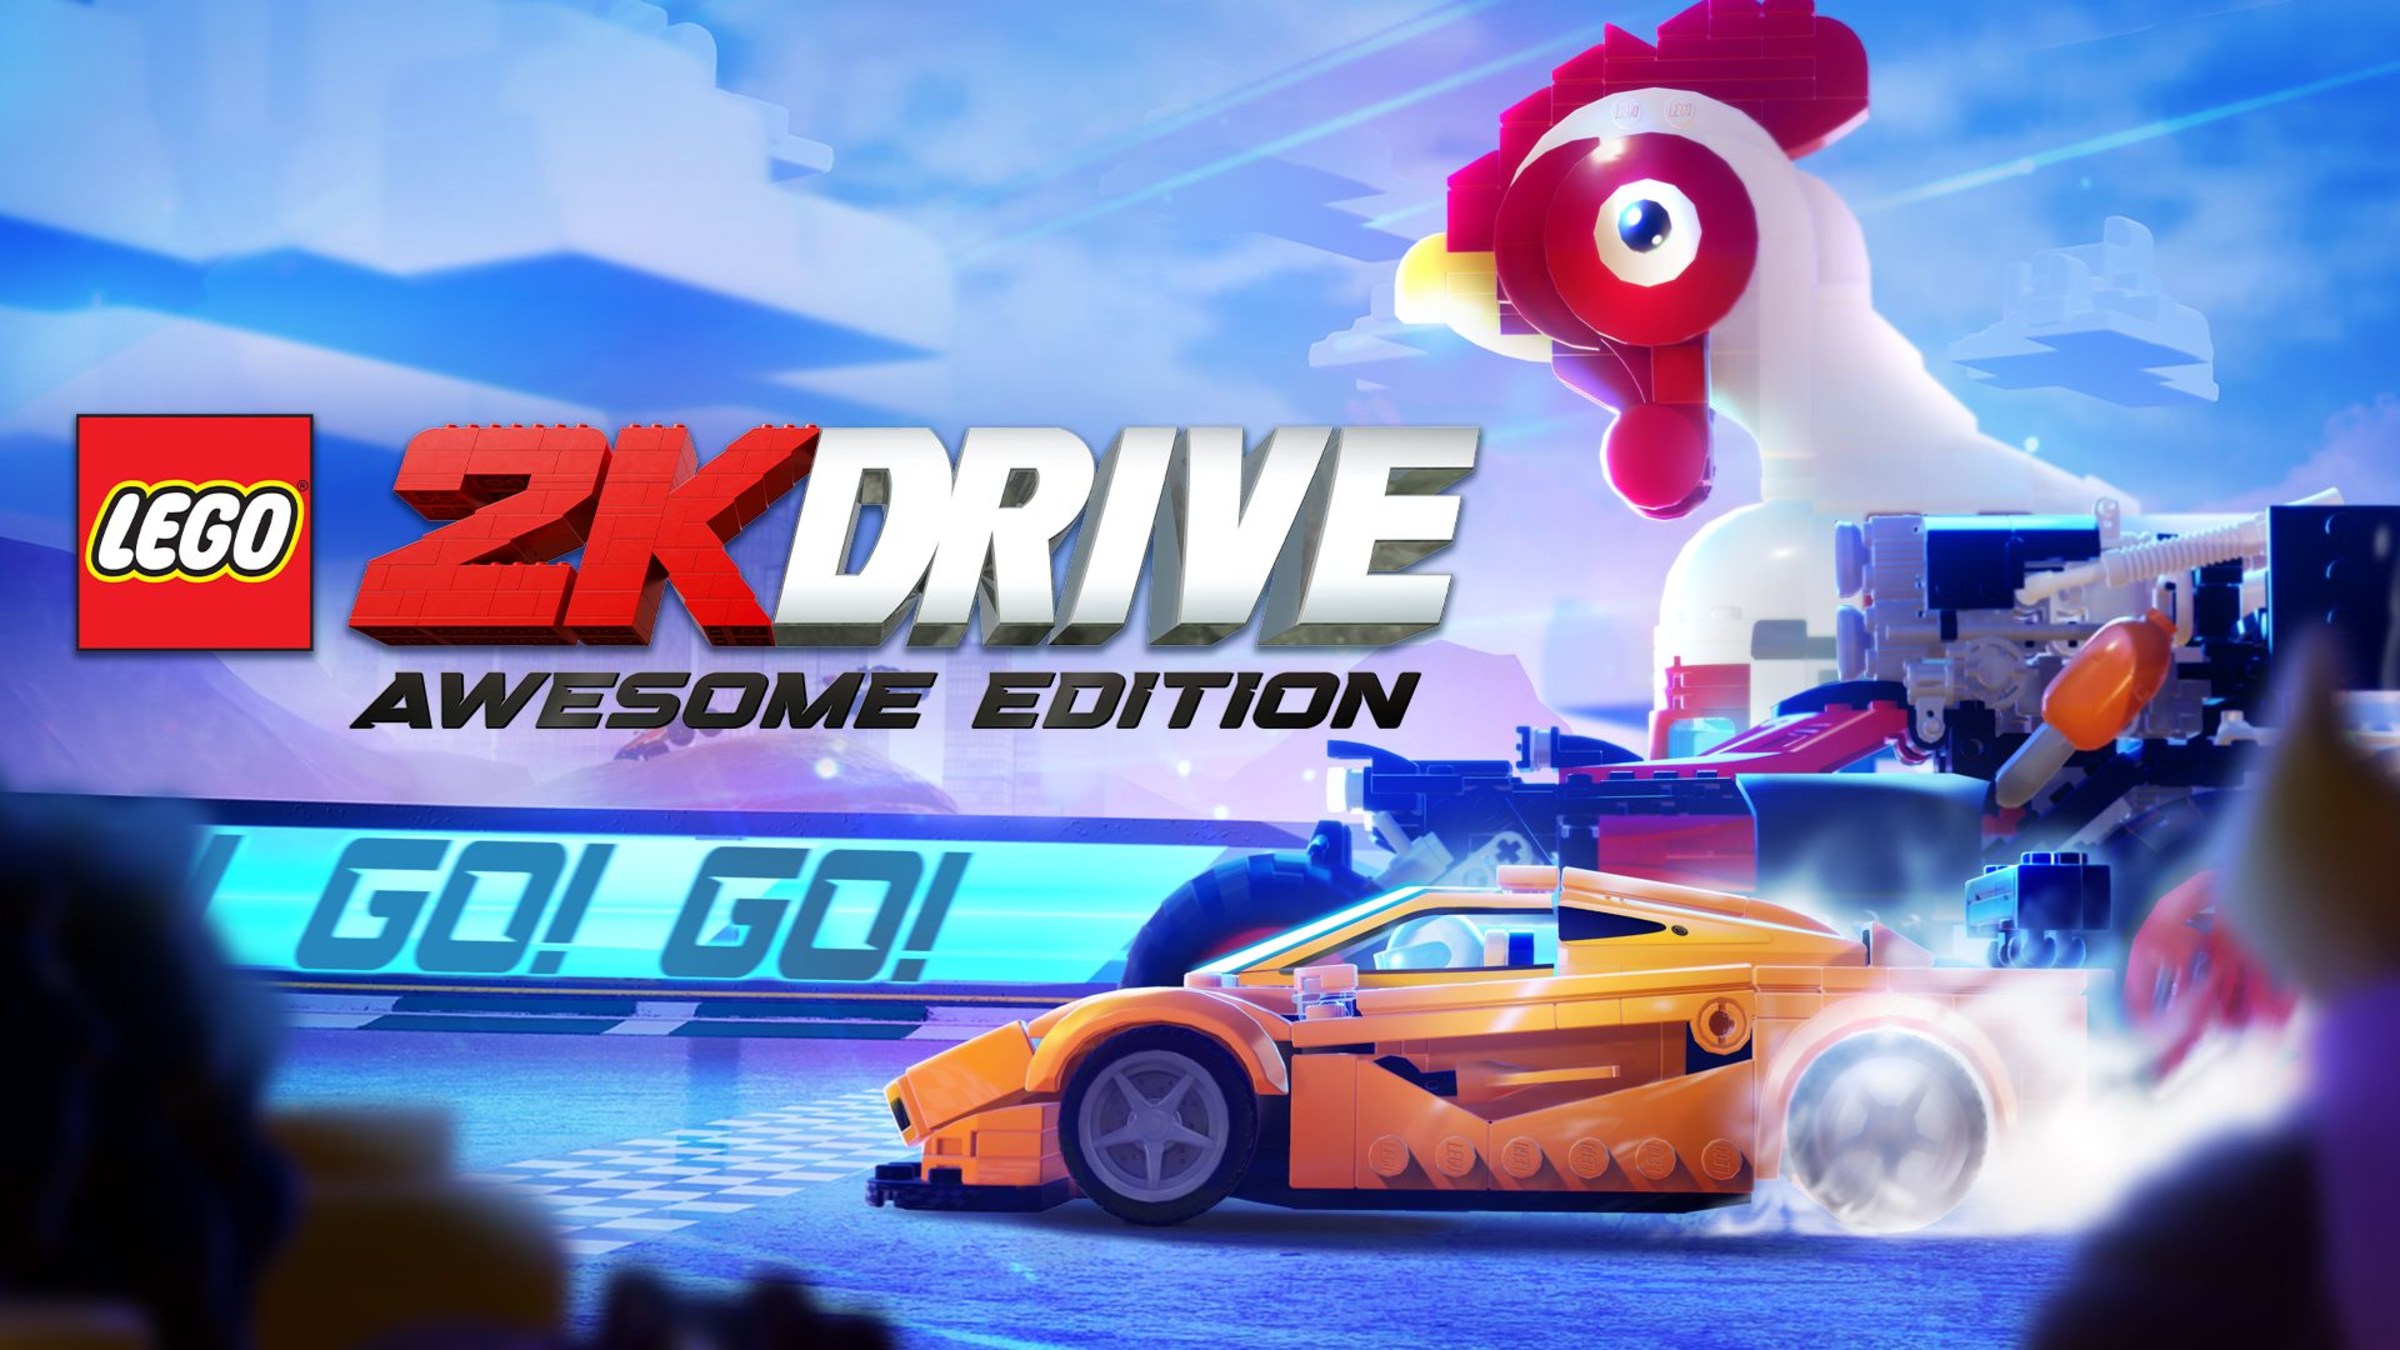  LEGO 2K Drive - Nintendo Switch includes 3-in-1